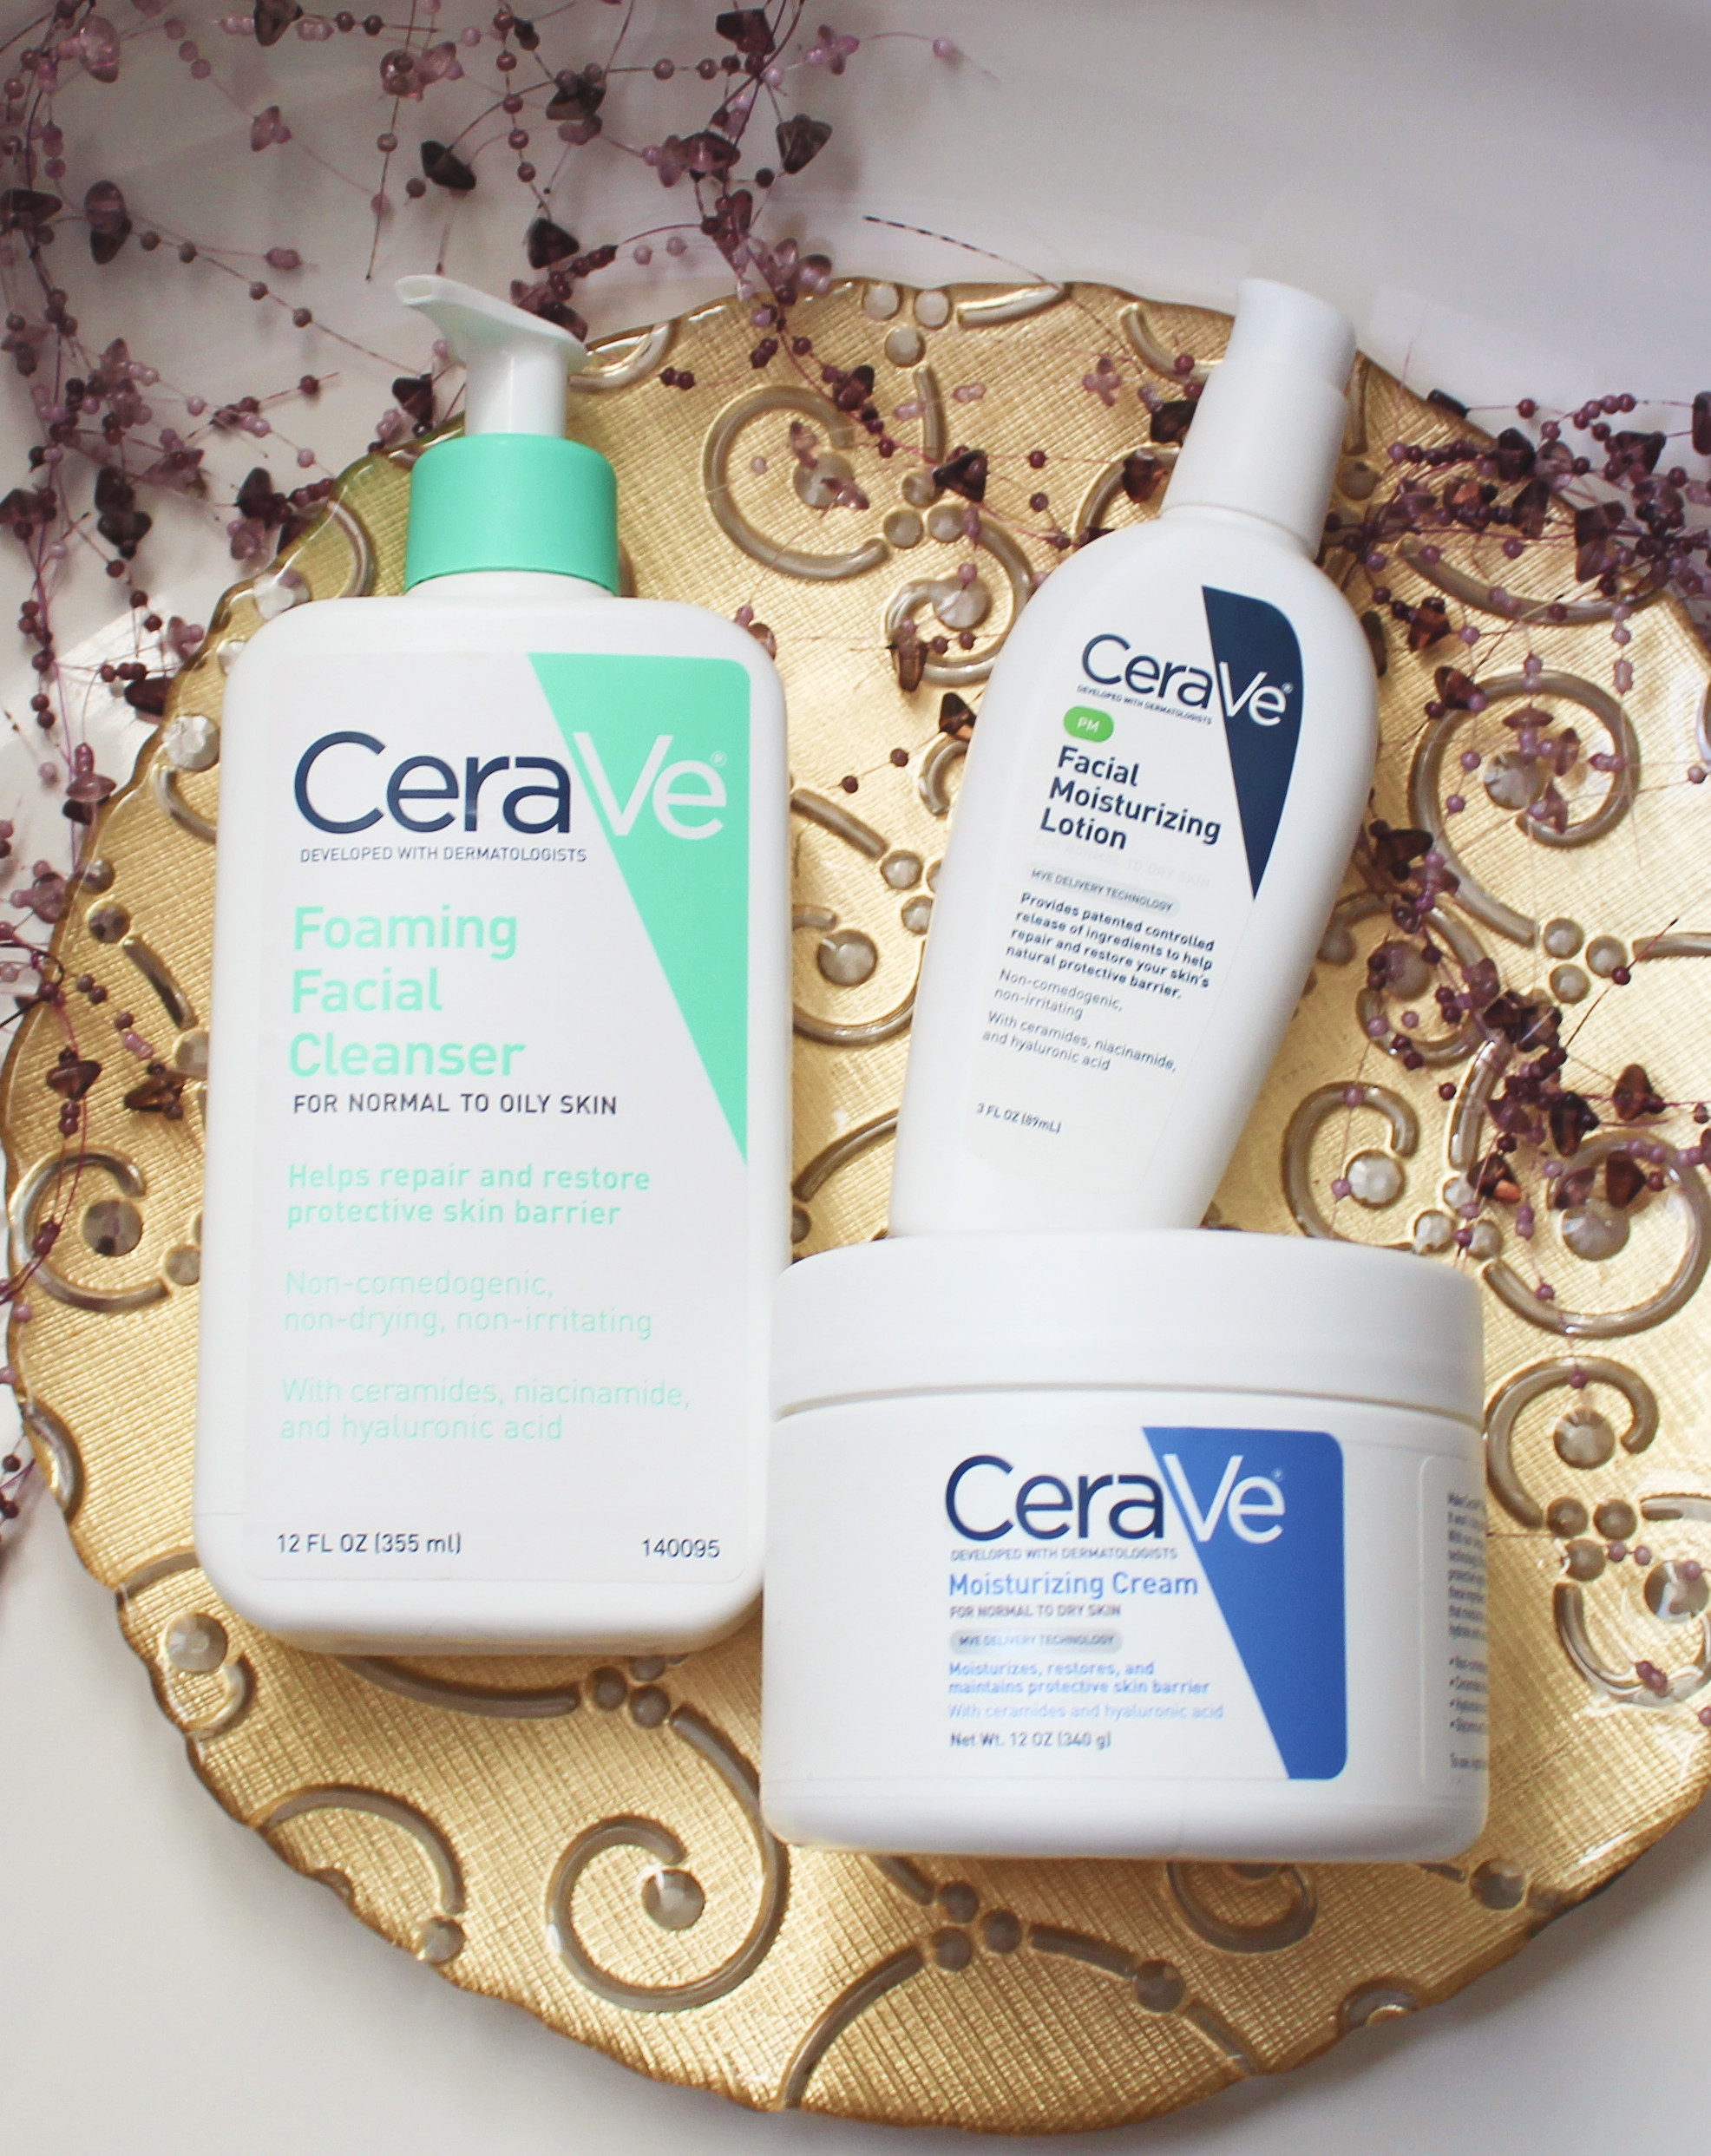 CeraVe Products